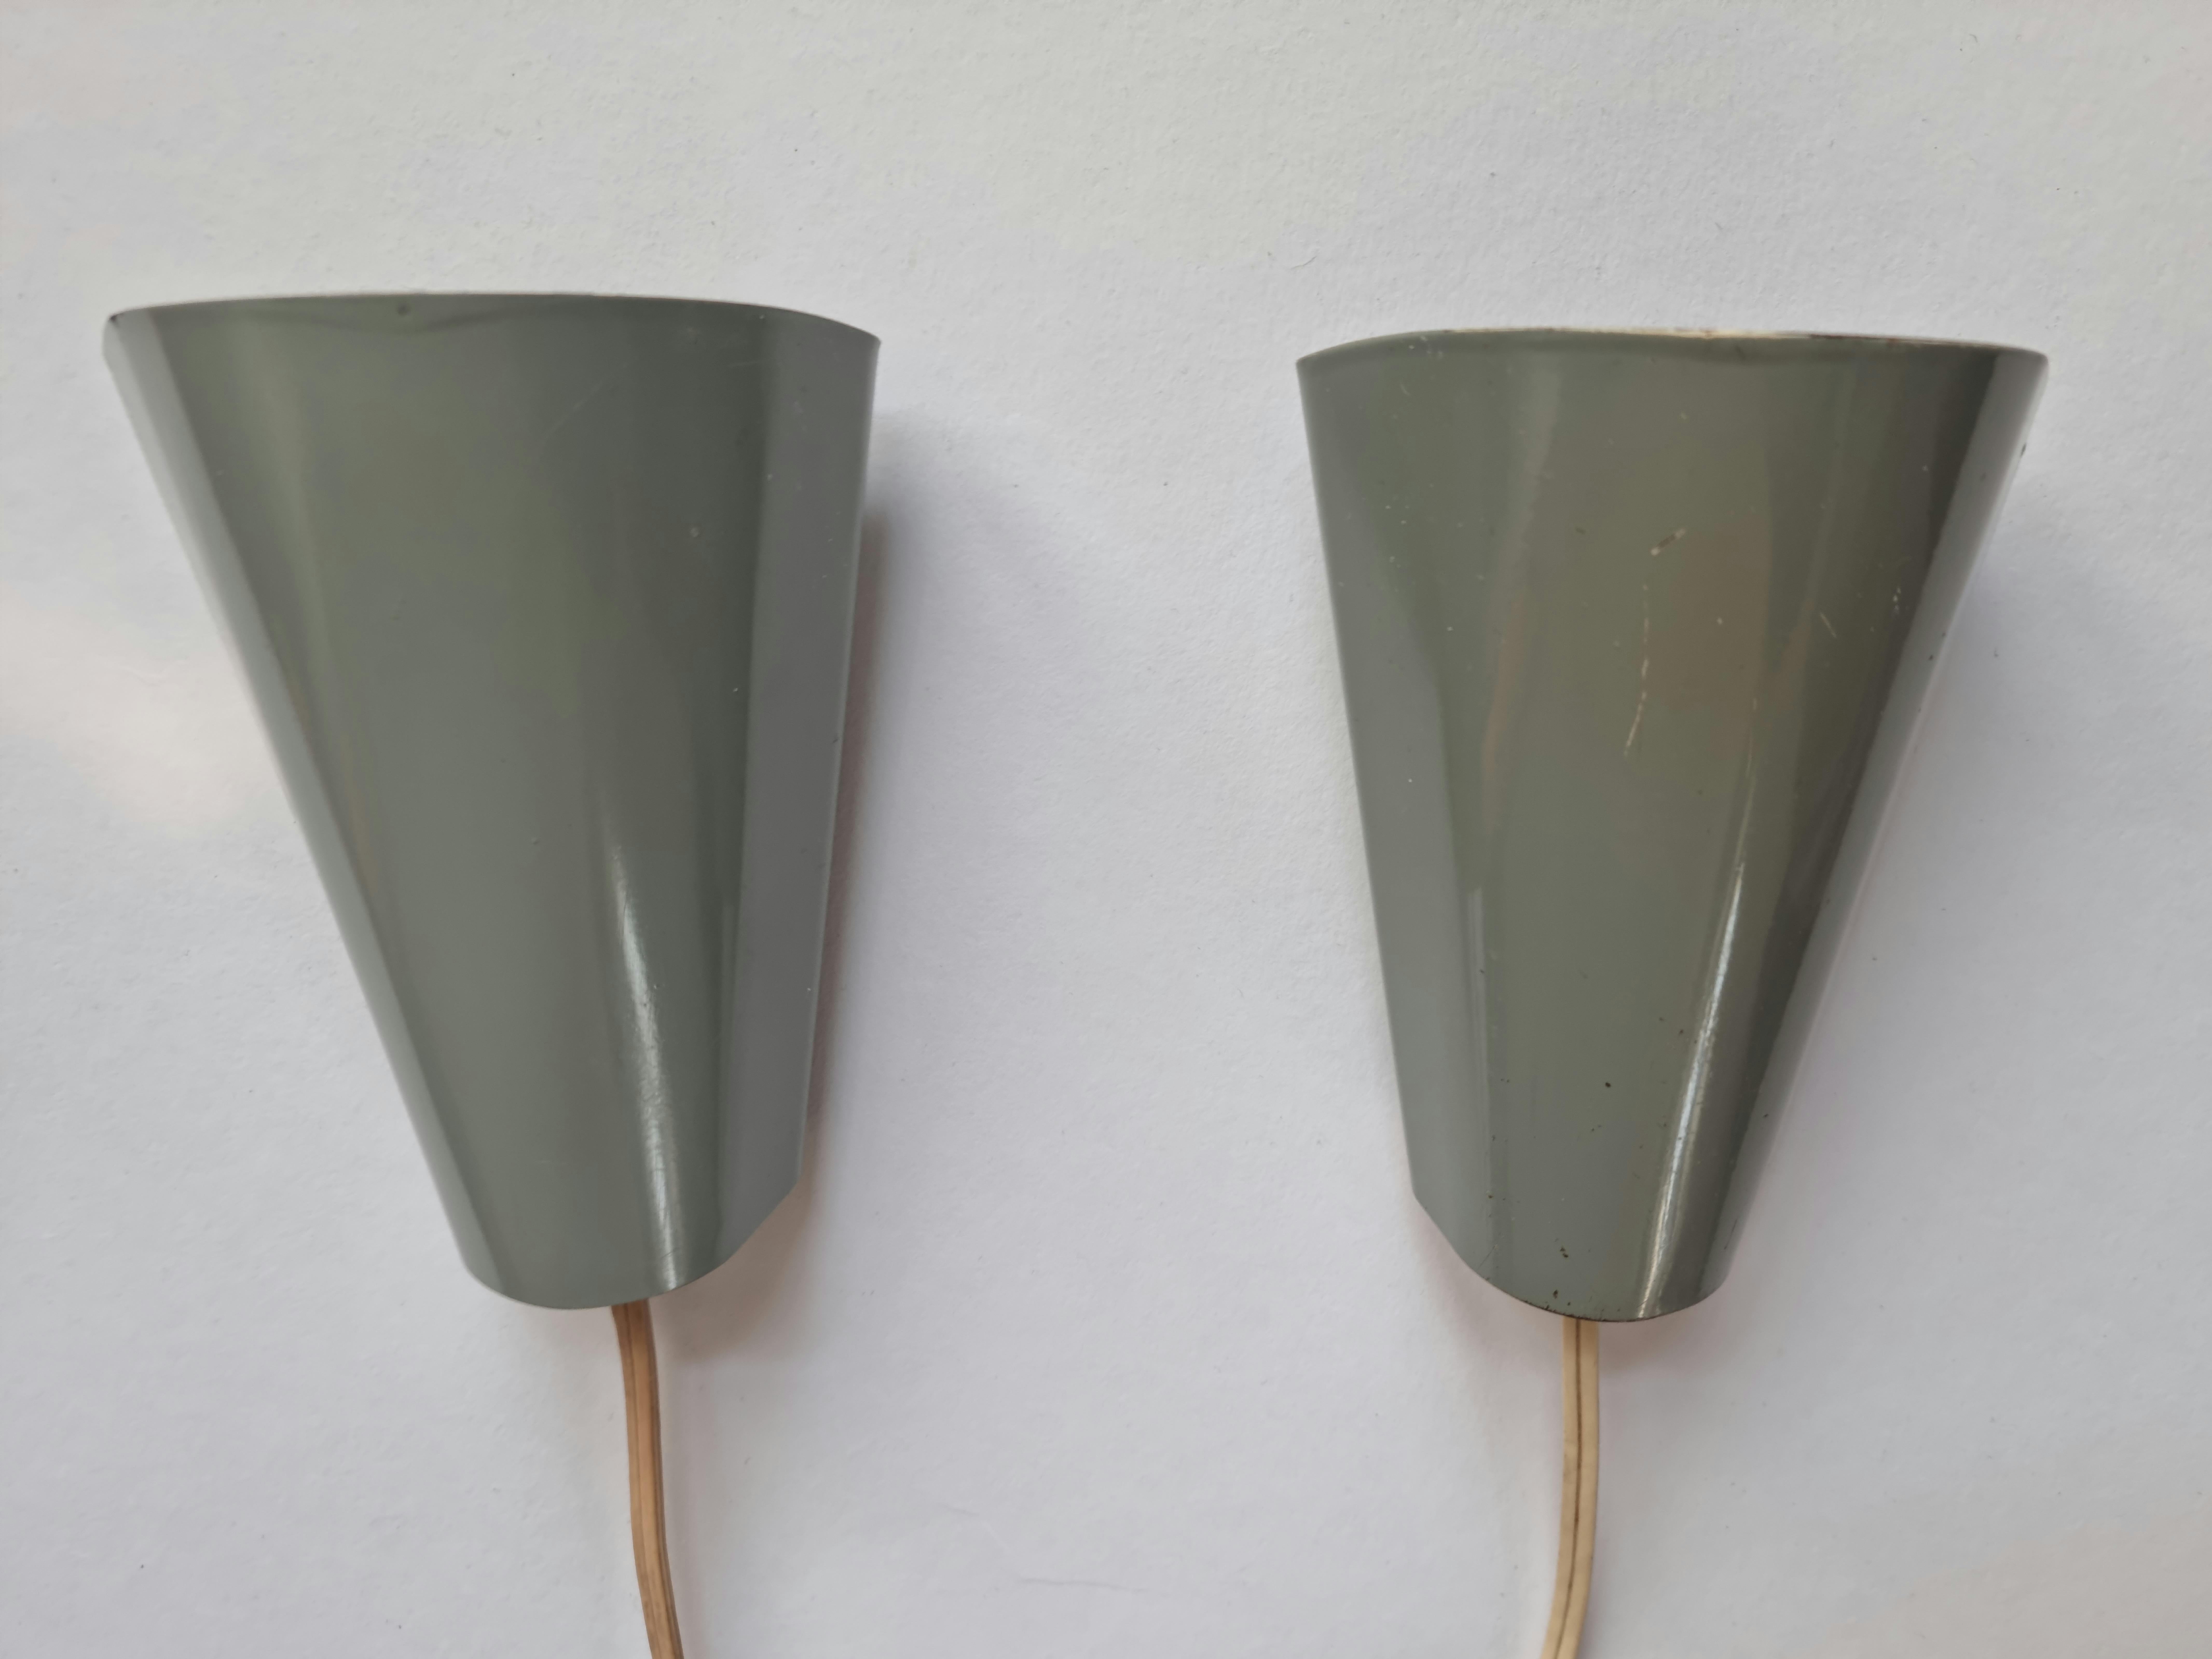 Czech Pair of Mid-Century Rare Wall Lamps Lidokov, Designed by Josef Hurka, 1960s For Sale